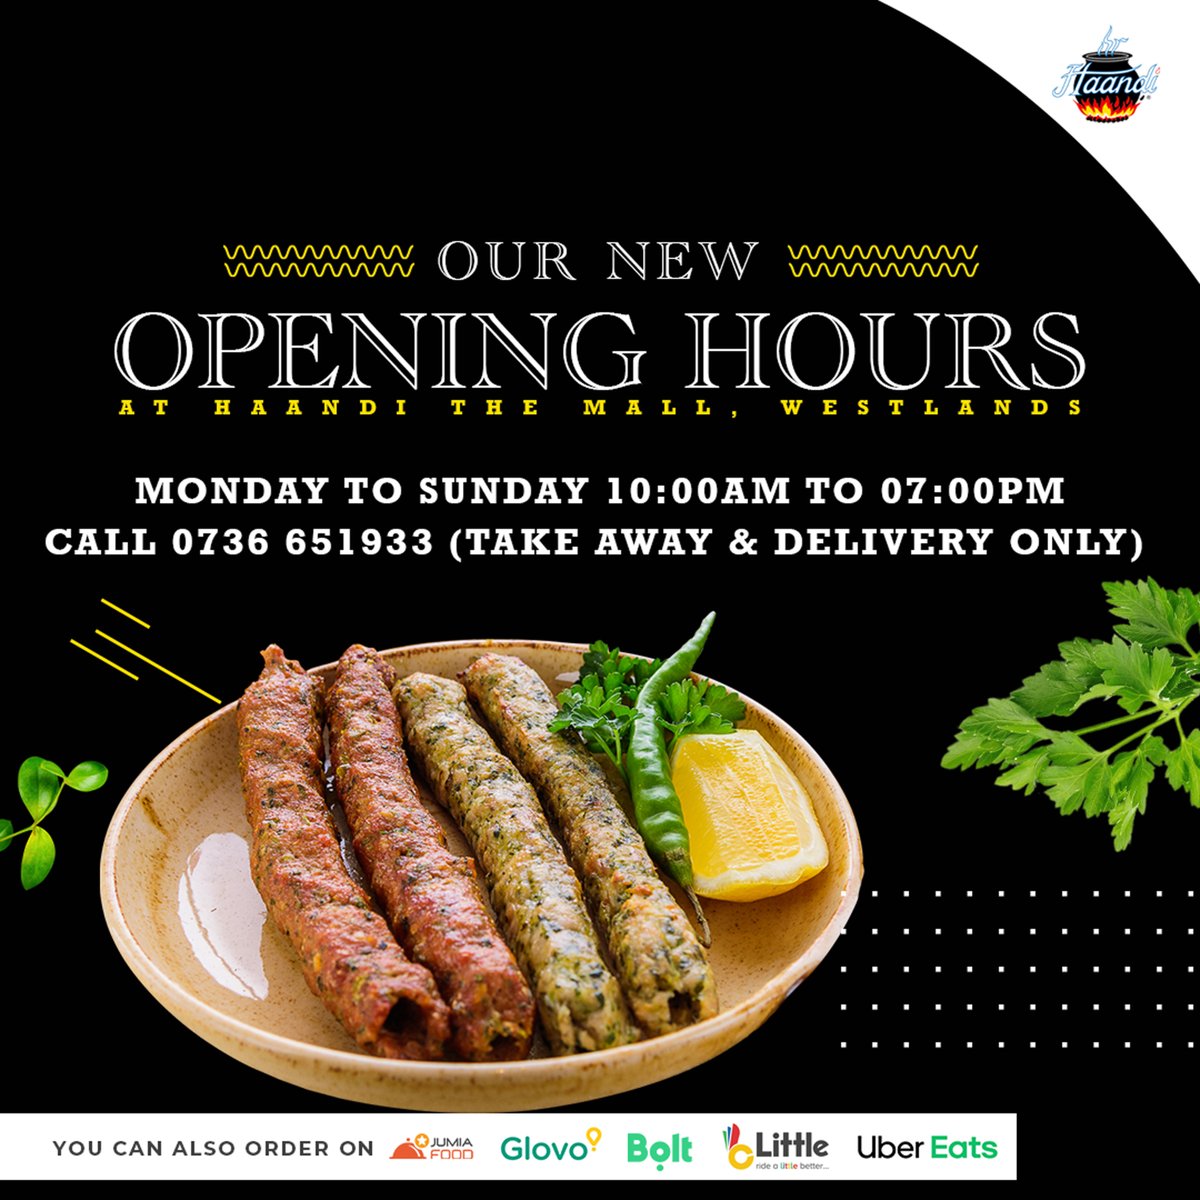 Get the same #HaandiExperience at home with our take-away and delivery services available daily from 10:00am to 07:00pm. Call 0736 651933 to place your orders.